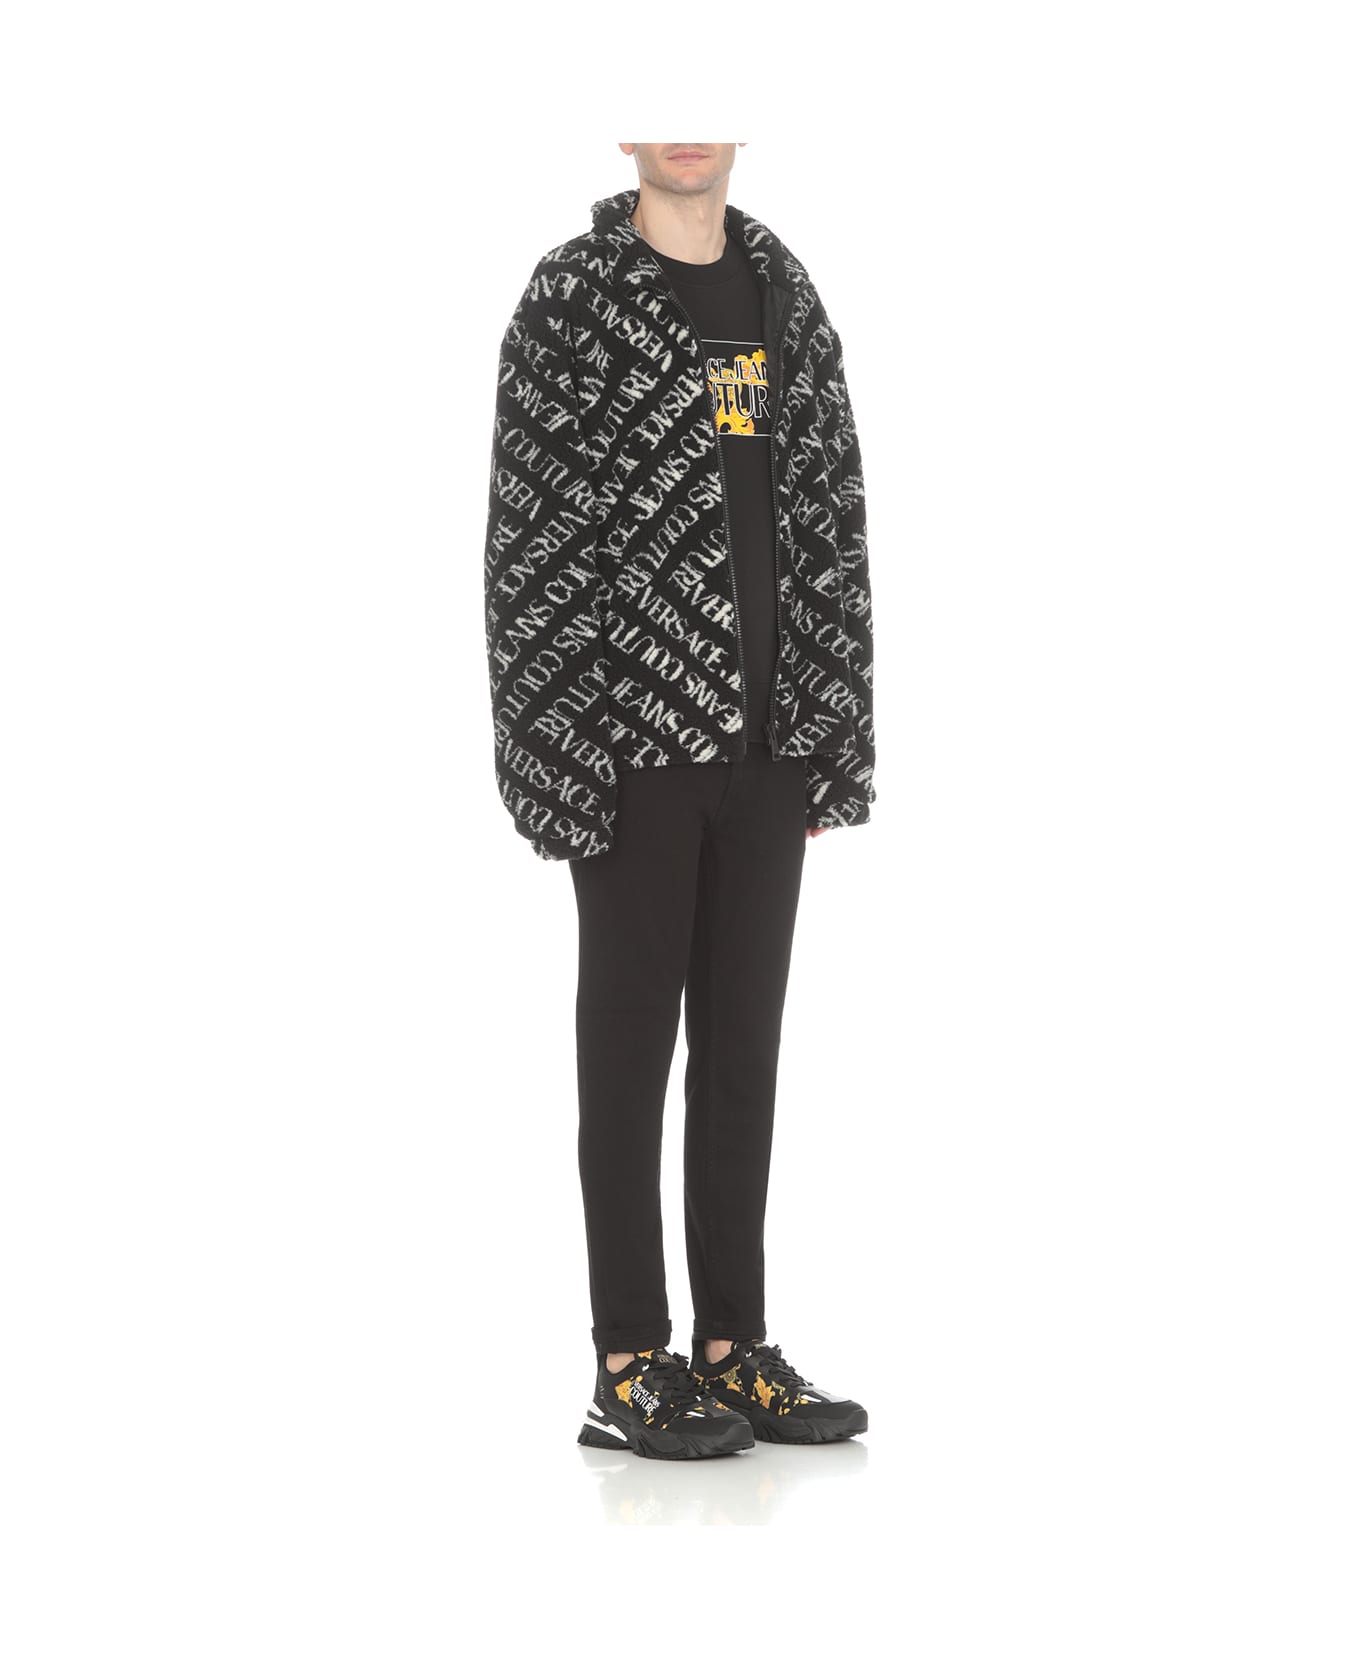 Versace Jeans Couture Versace Chain Couture Sweatshirt - Black フリース